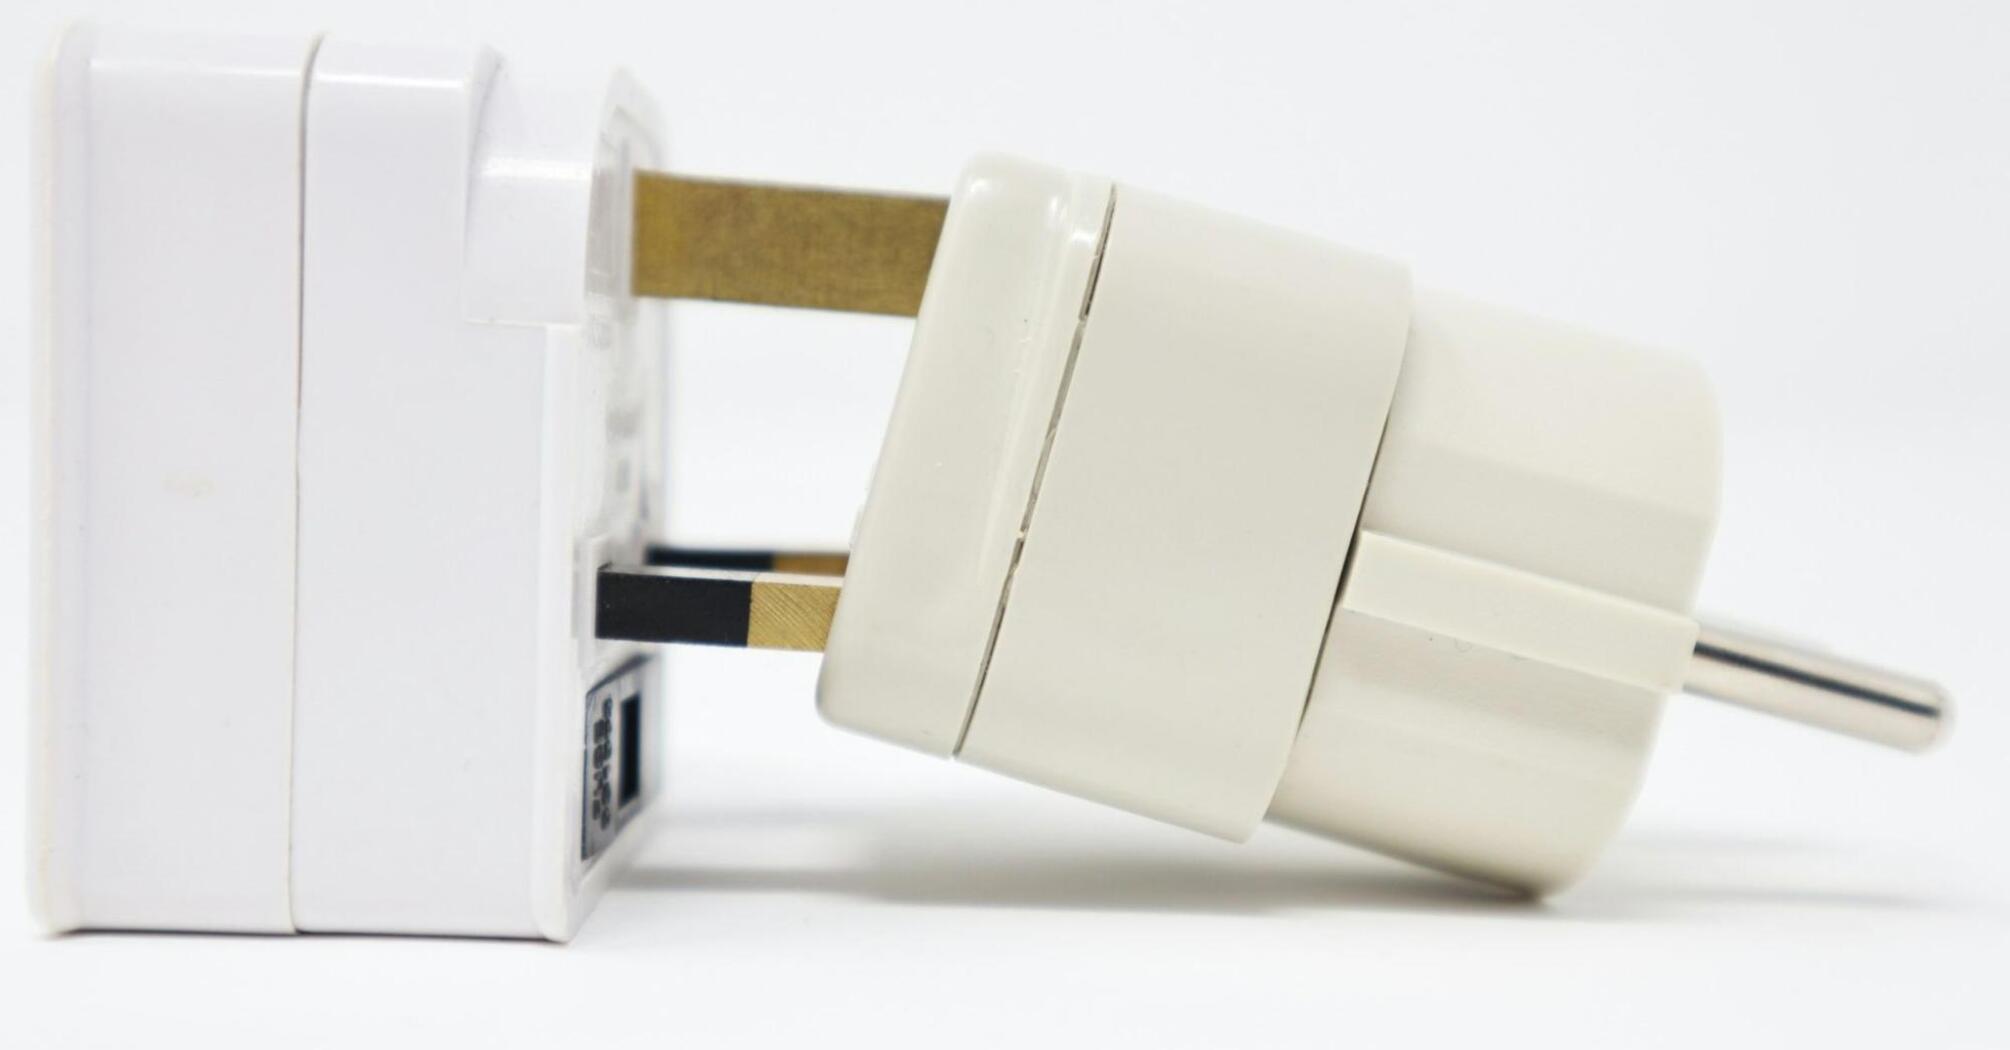 A white adapter and a plug